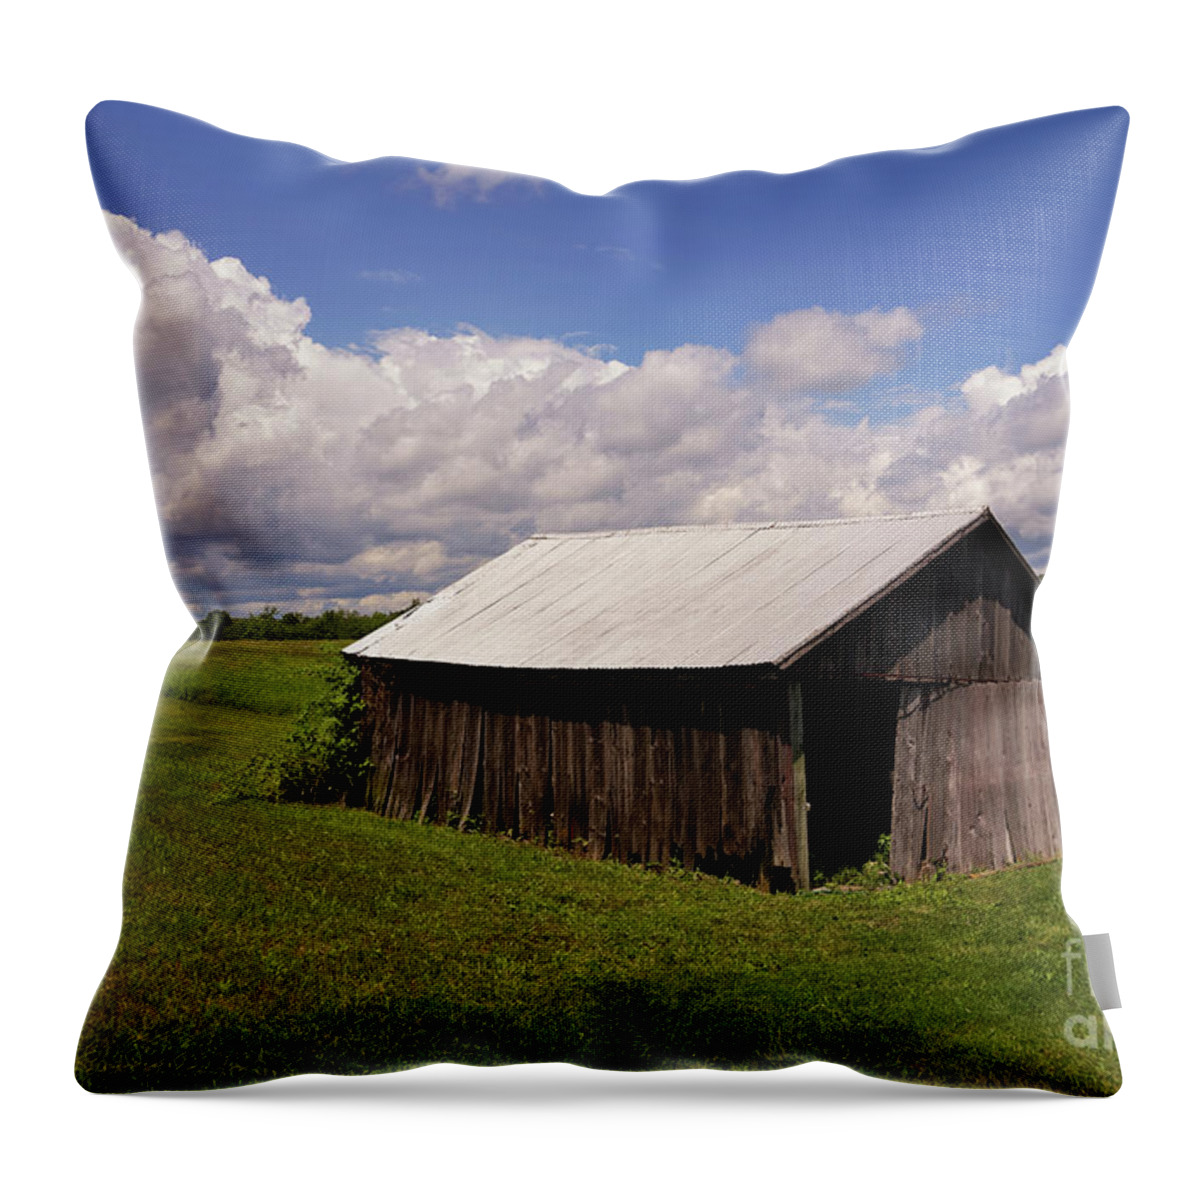 Memories Of July Throw Pillow featuring the photograph Memories of July by Rachel Cohen